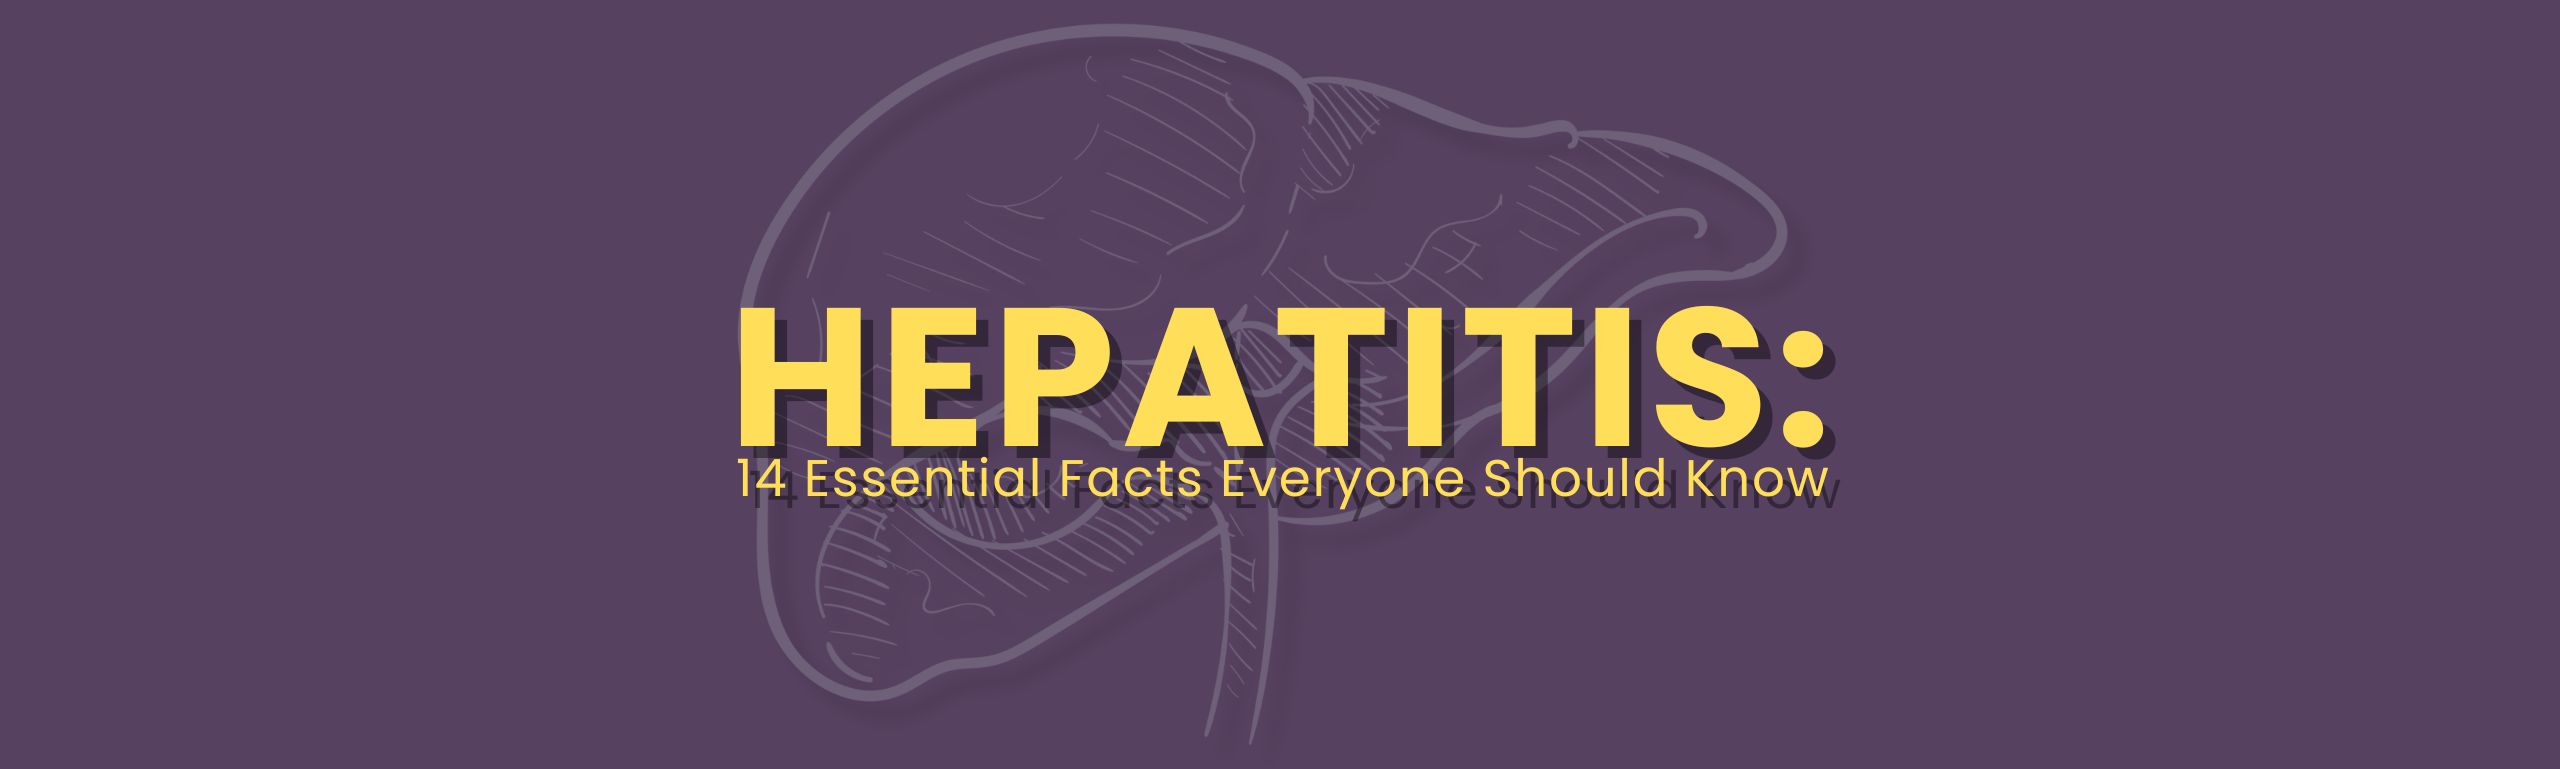 hepatitis myths vs facts: 14 essential facts everyone should know